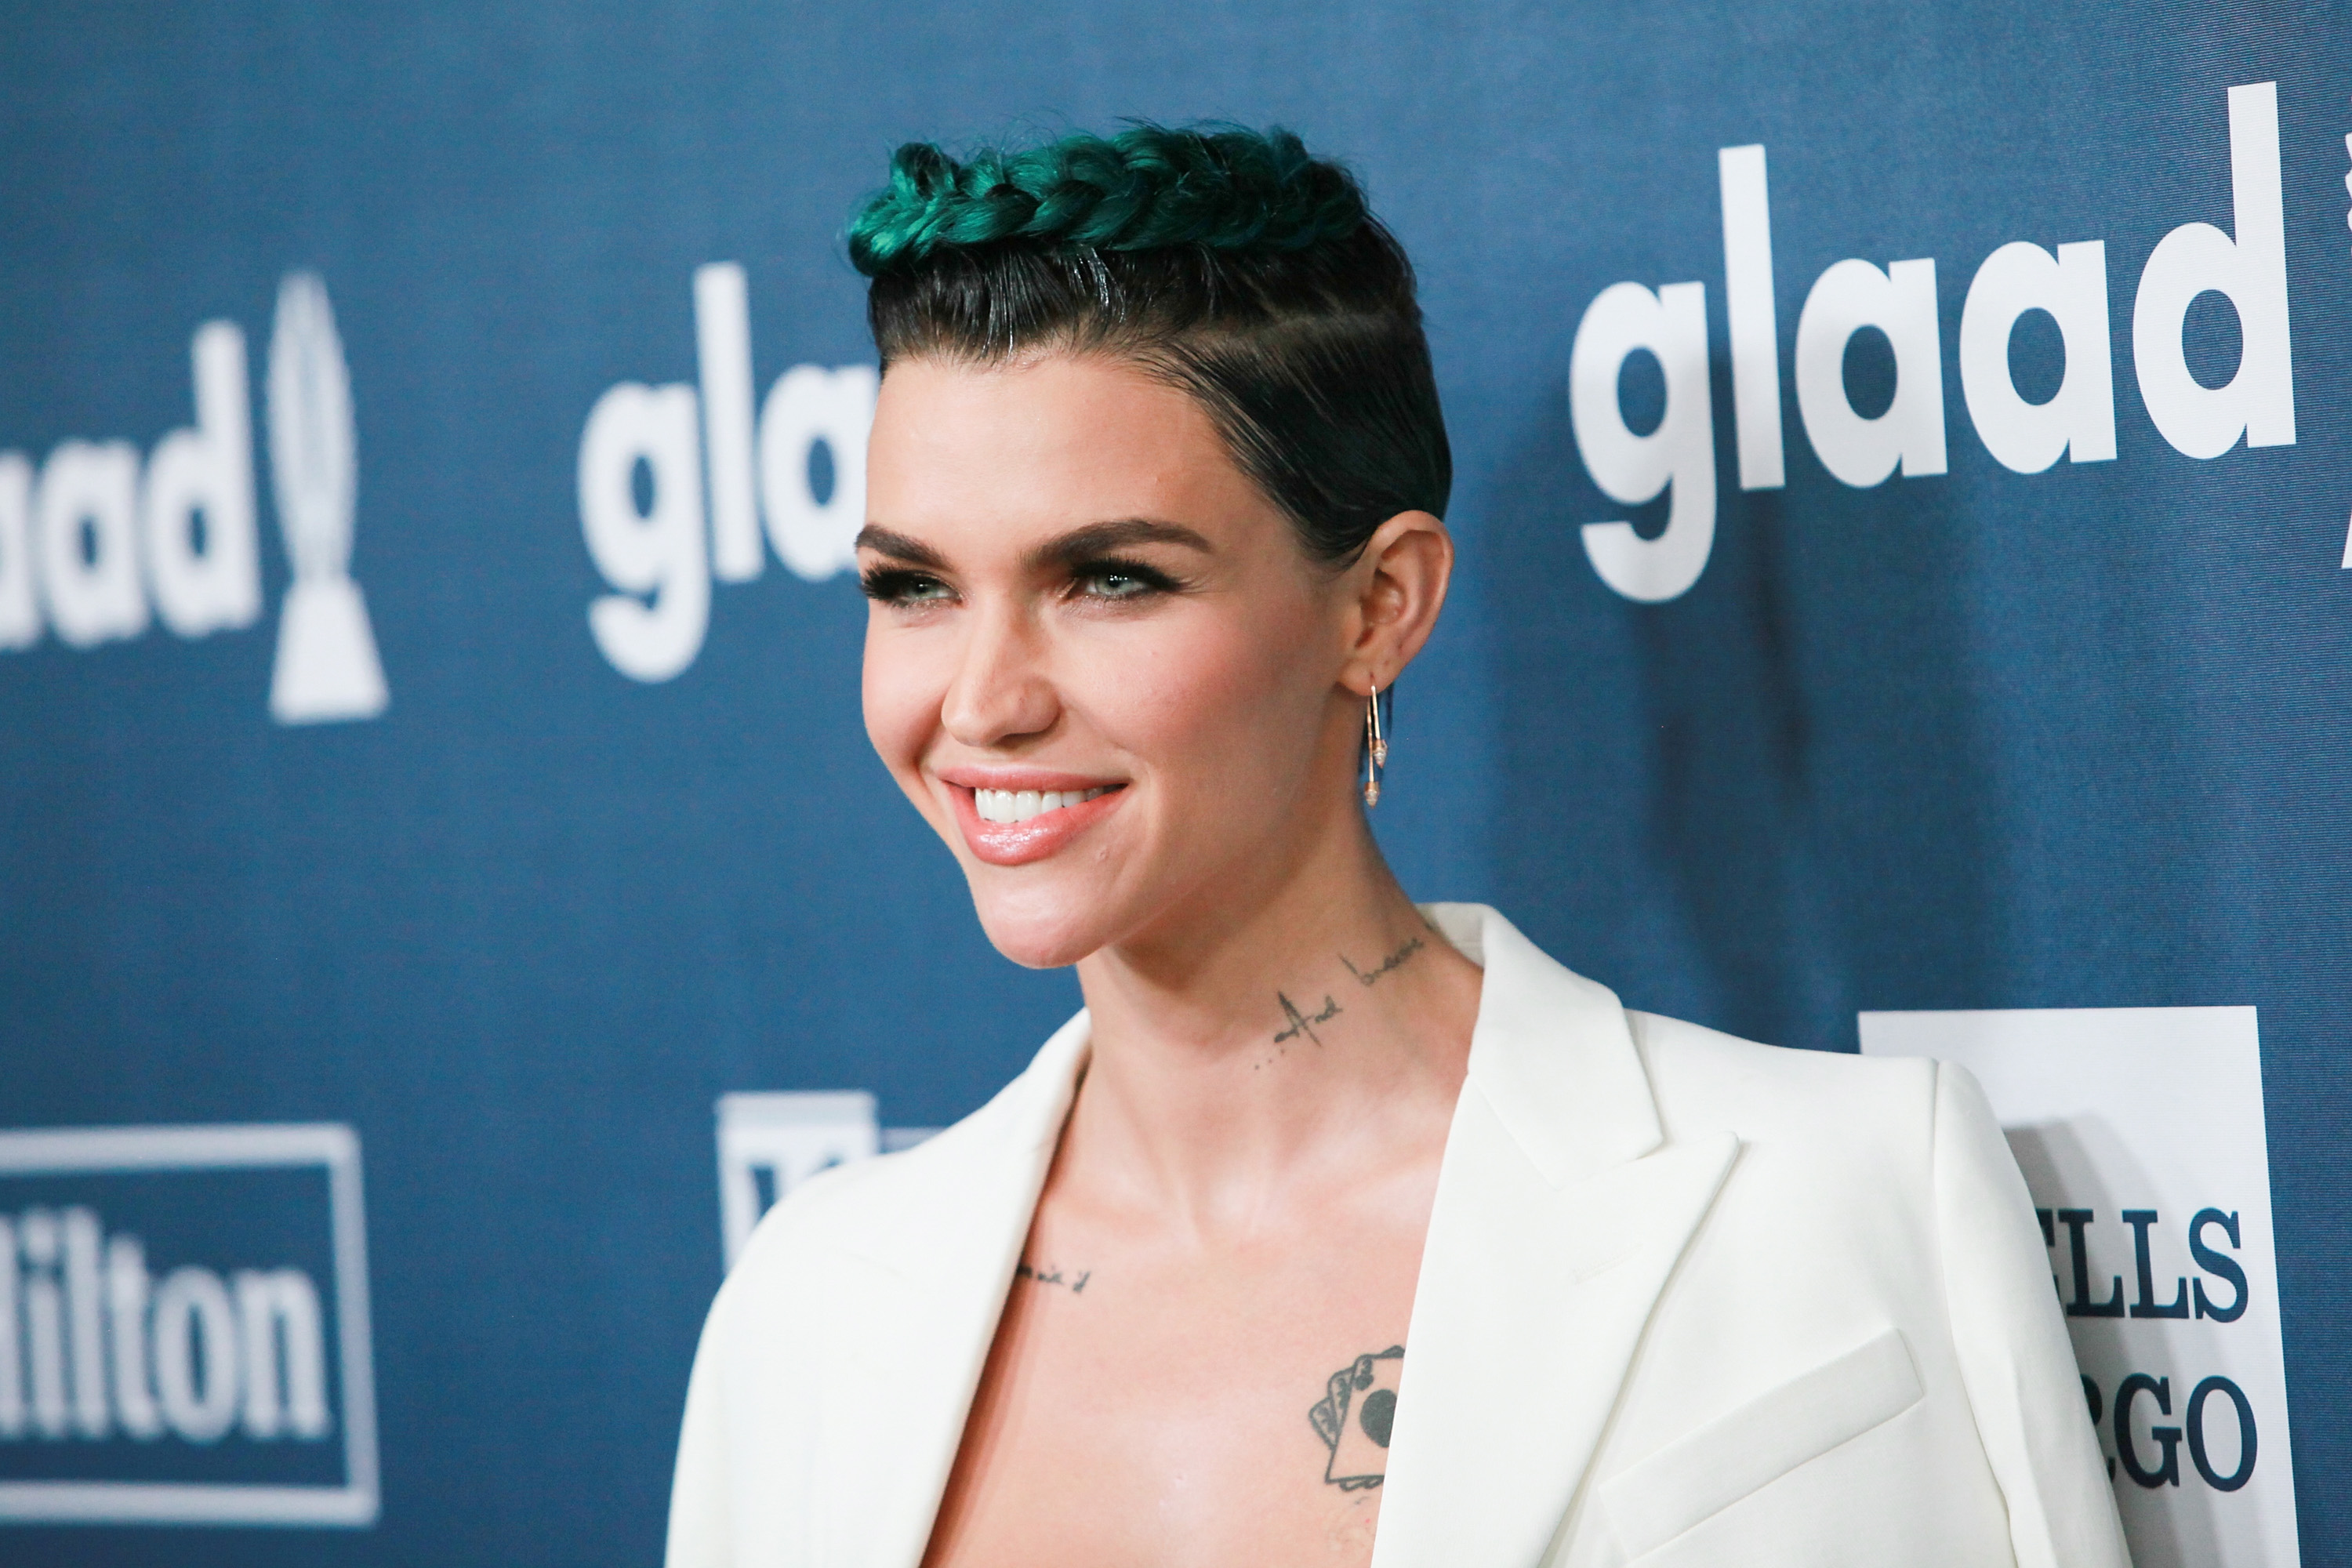 Honoree Ruby Rose arrives at the 27th Annual GLAAD Media Awards at The Beverly Hilton Hotel on April 2, 2016 in Beverly Hills, California. (David Livingston—Getty Images)